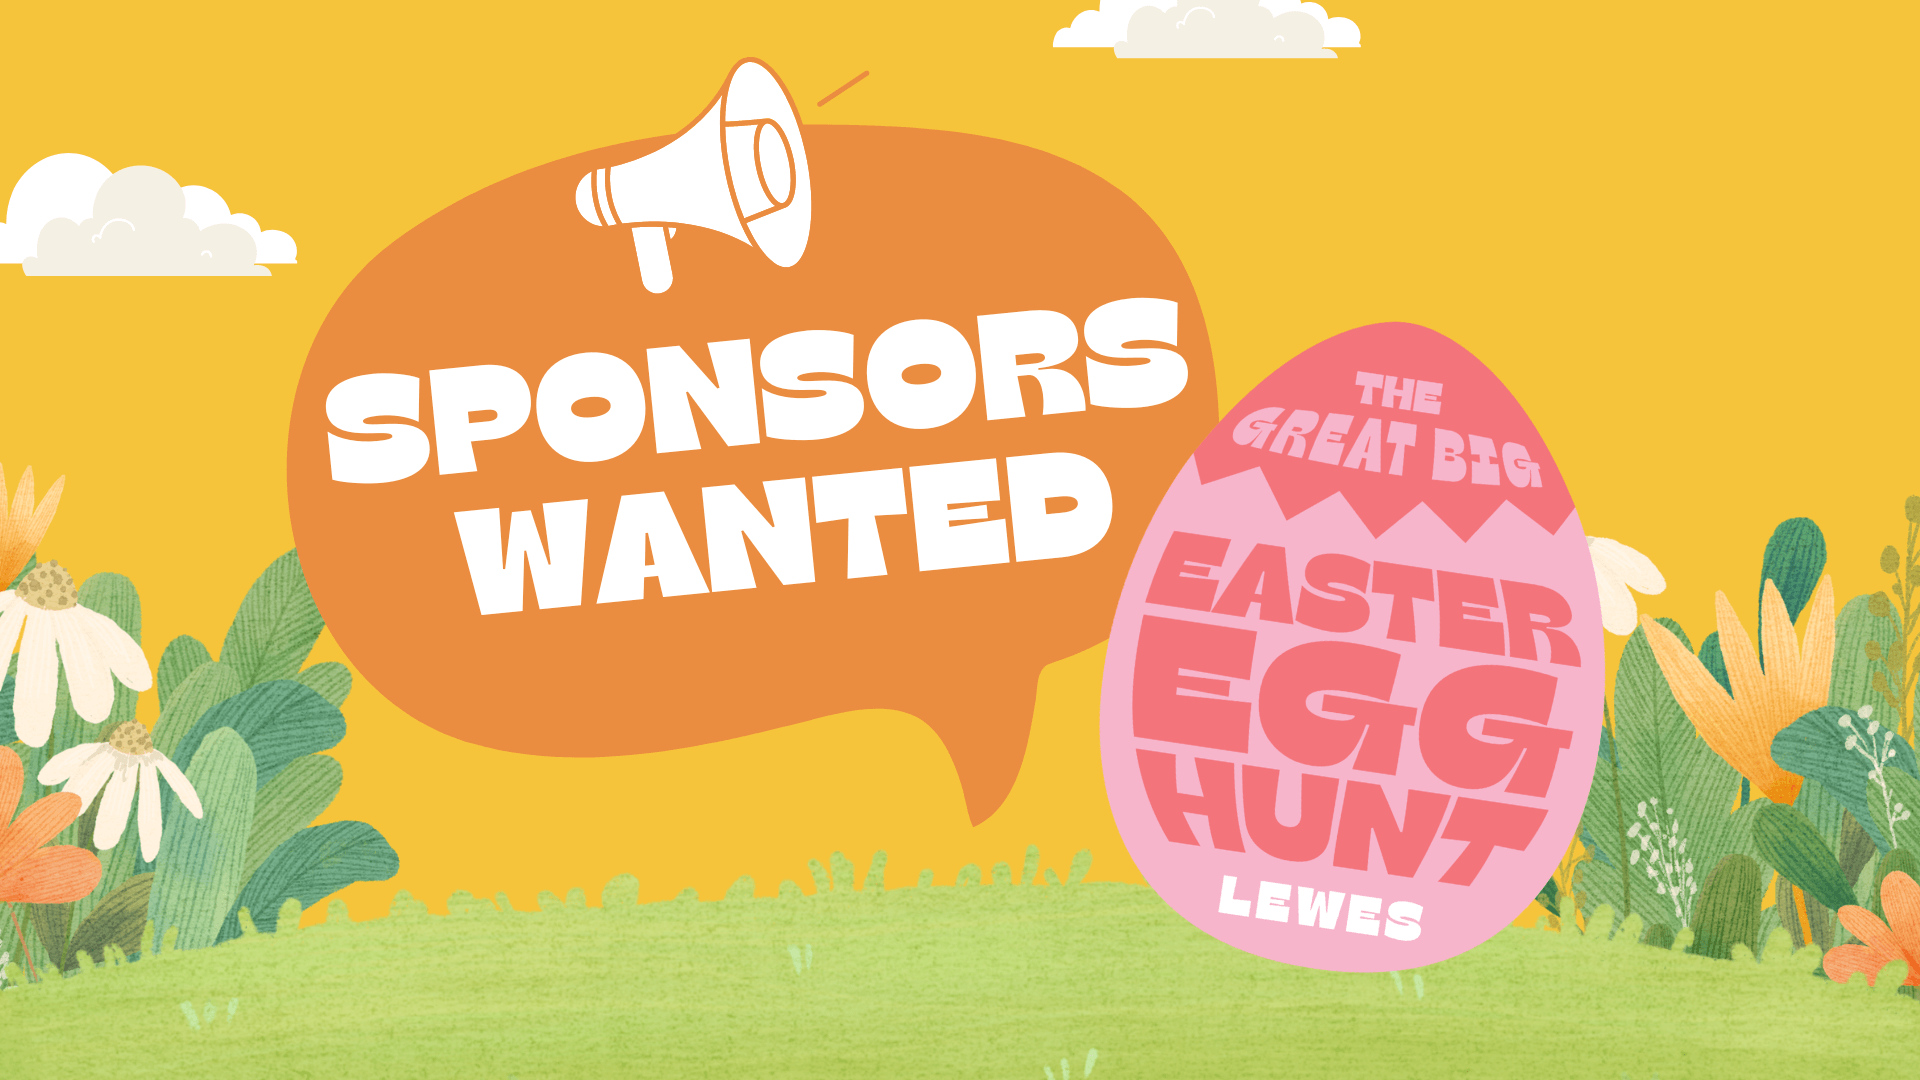 Sponsors Wanted: The Great Big Easter Egg Hunt Lewes